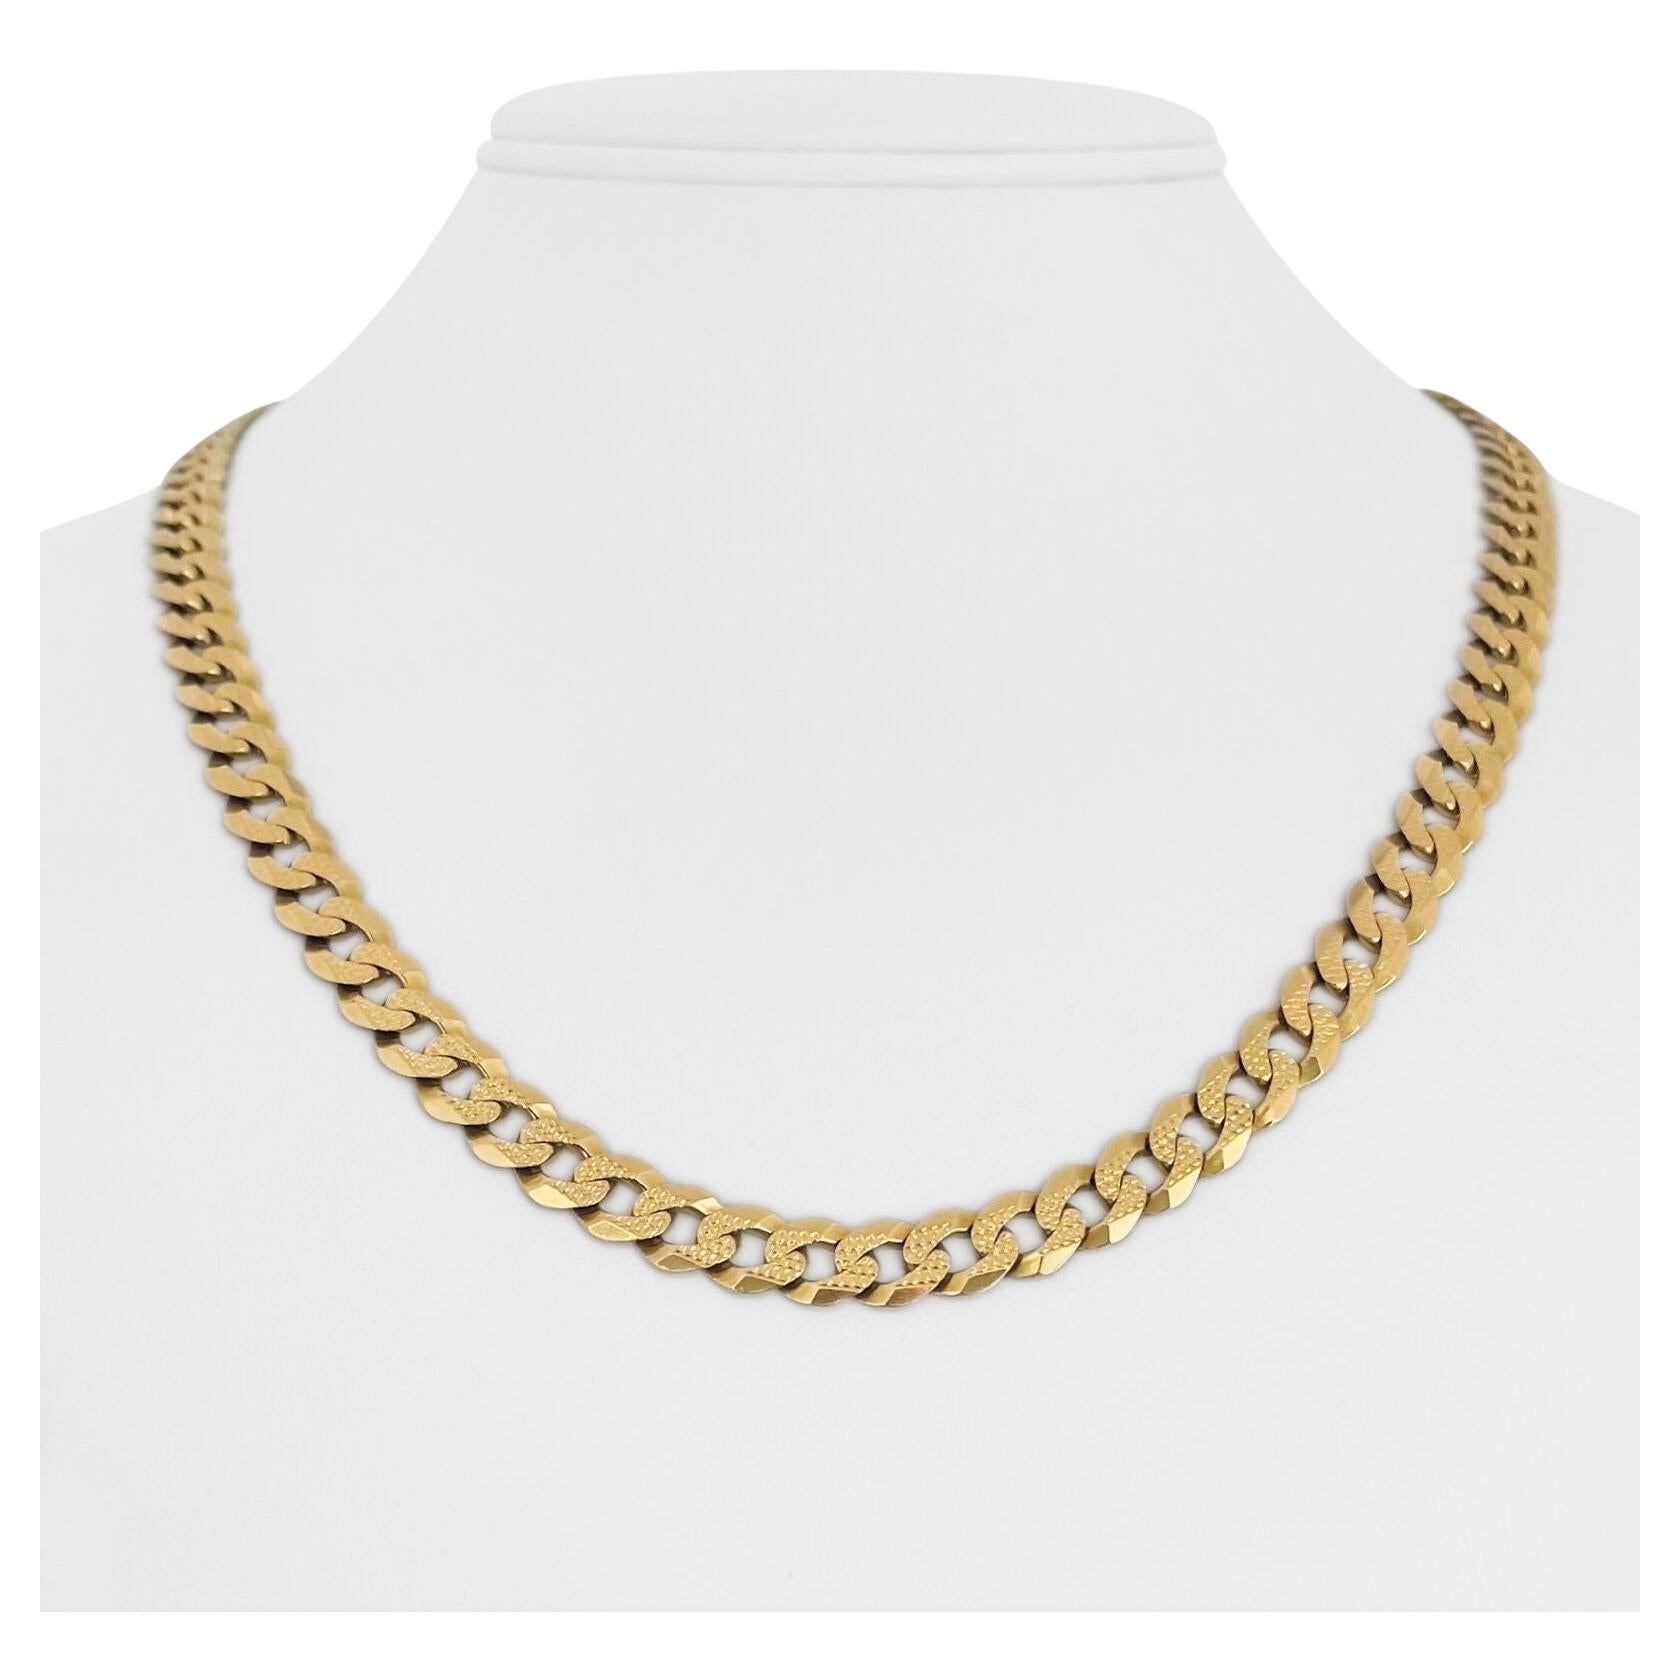 14 Karat Yellow Gold Solid Diamond Cut Curb Link Chain Necklace Italy